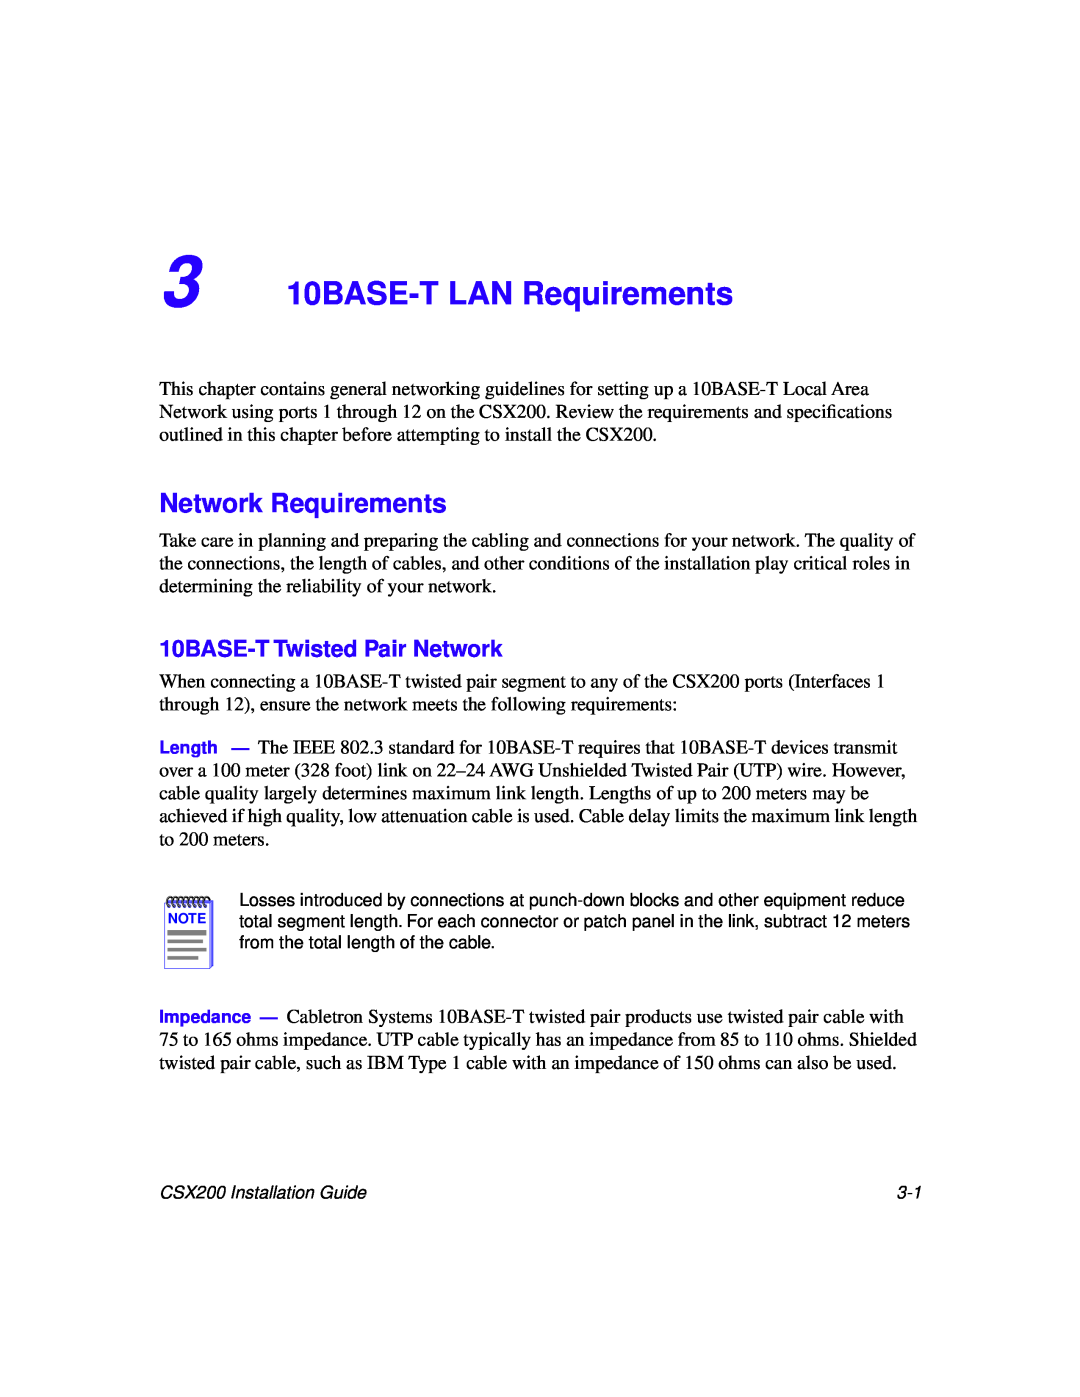 Cabletron Systems CSX200 manual 10BASE-T LAN Requirements, Network Requirements, 10BASE-T Twisted Pair Network 